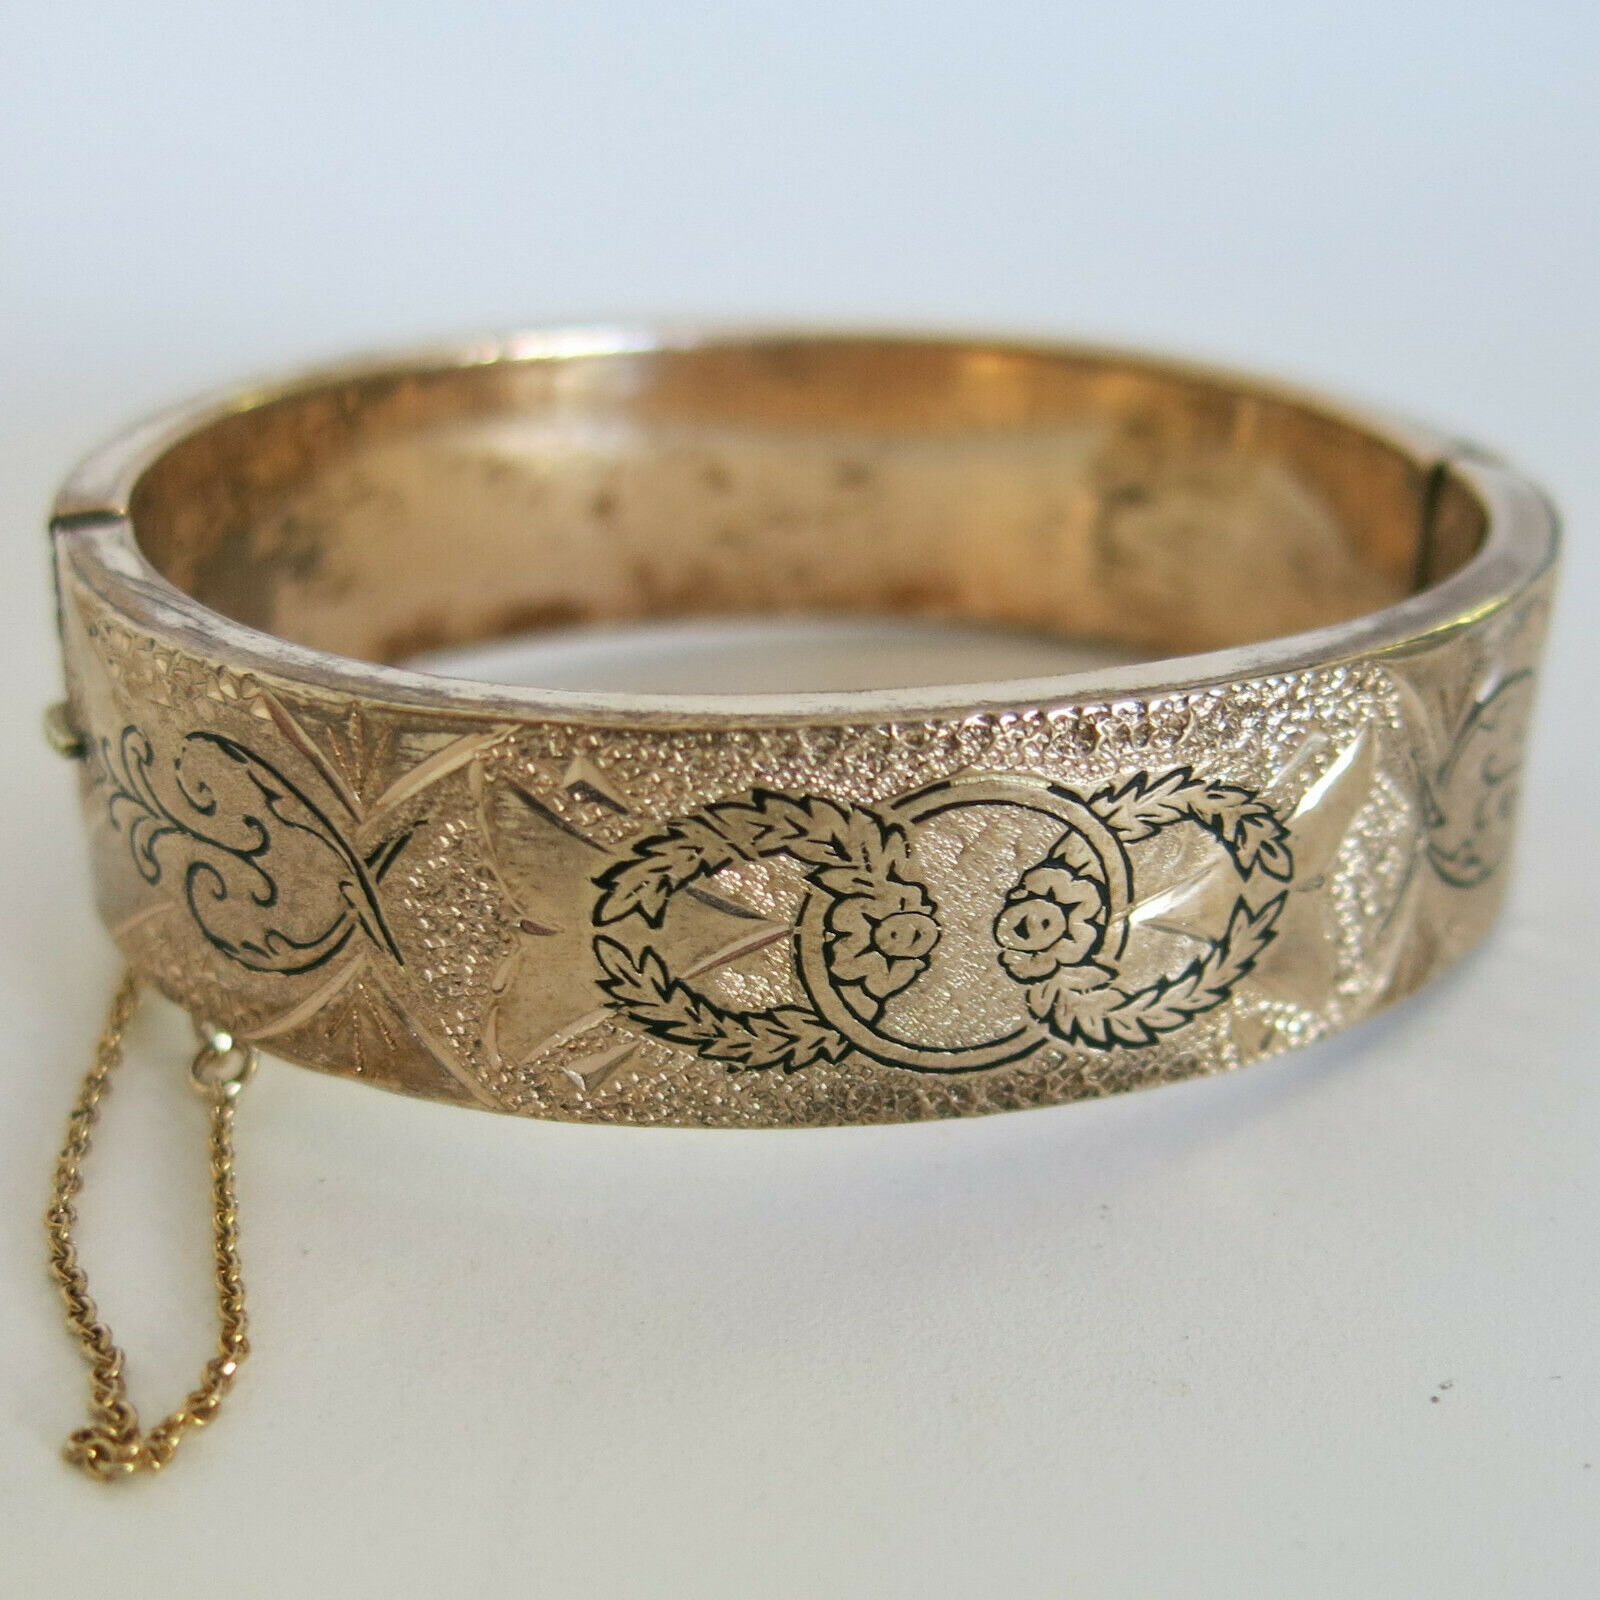 Victorian Small Hinged Oval Bangle Bracelet Gf Gold Filled [6016]